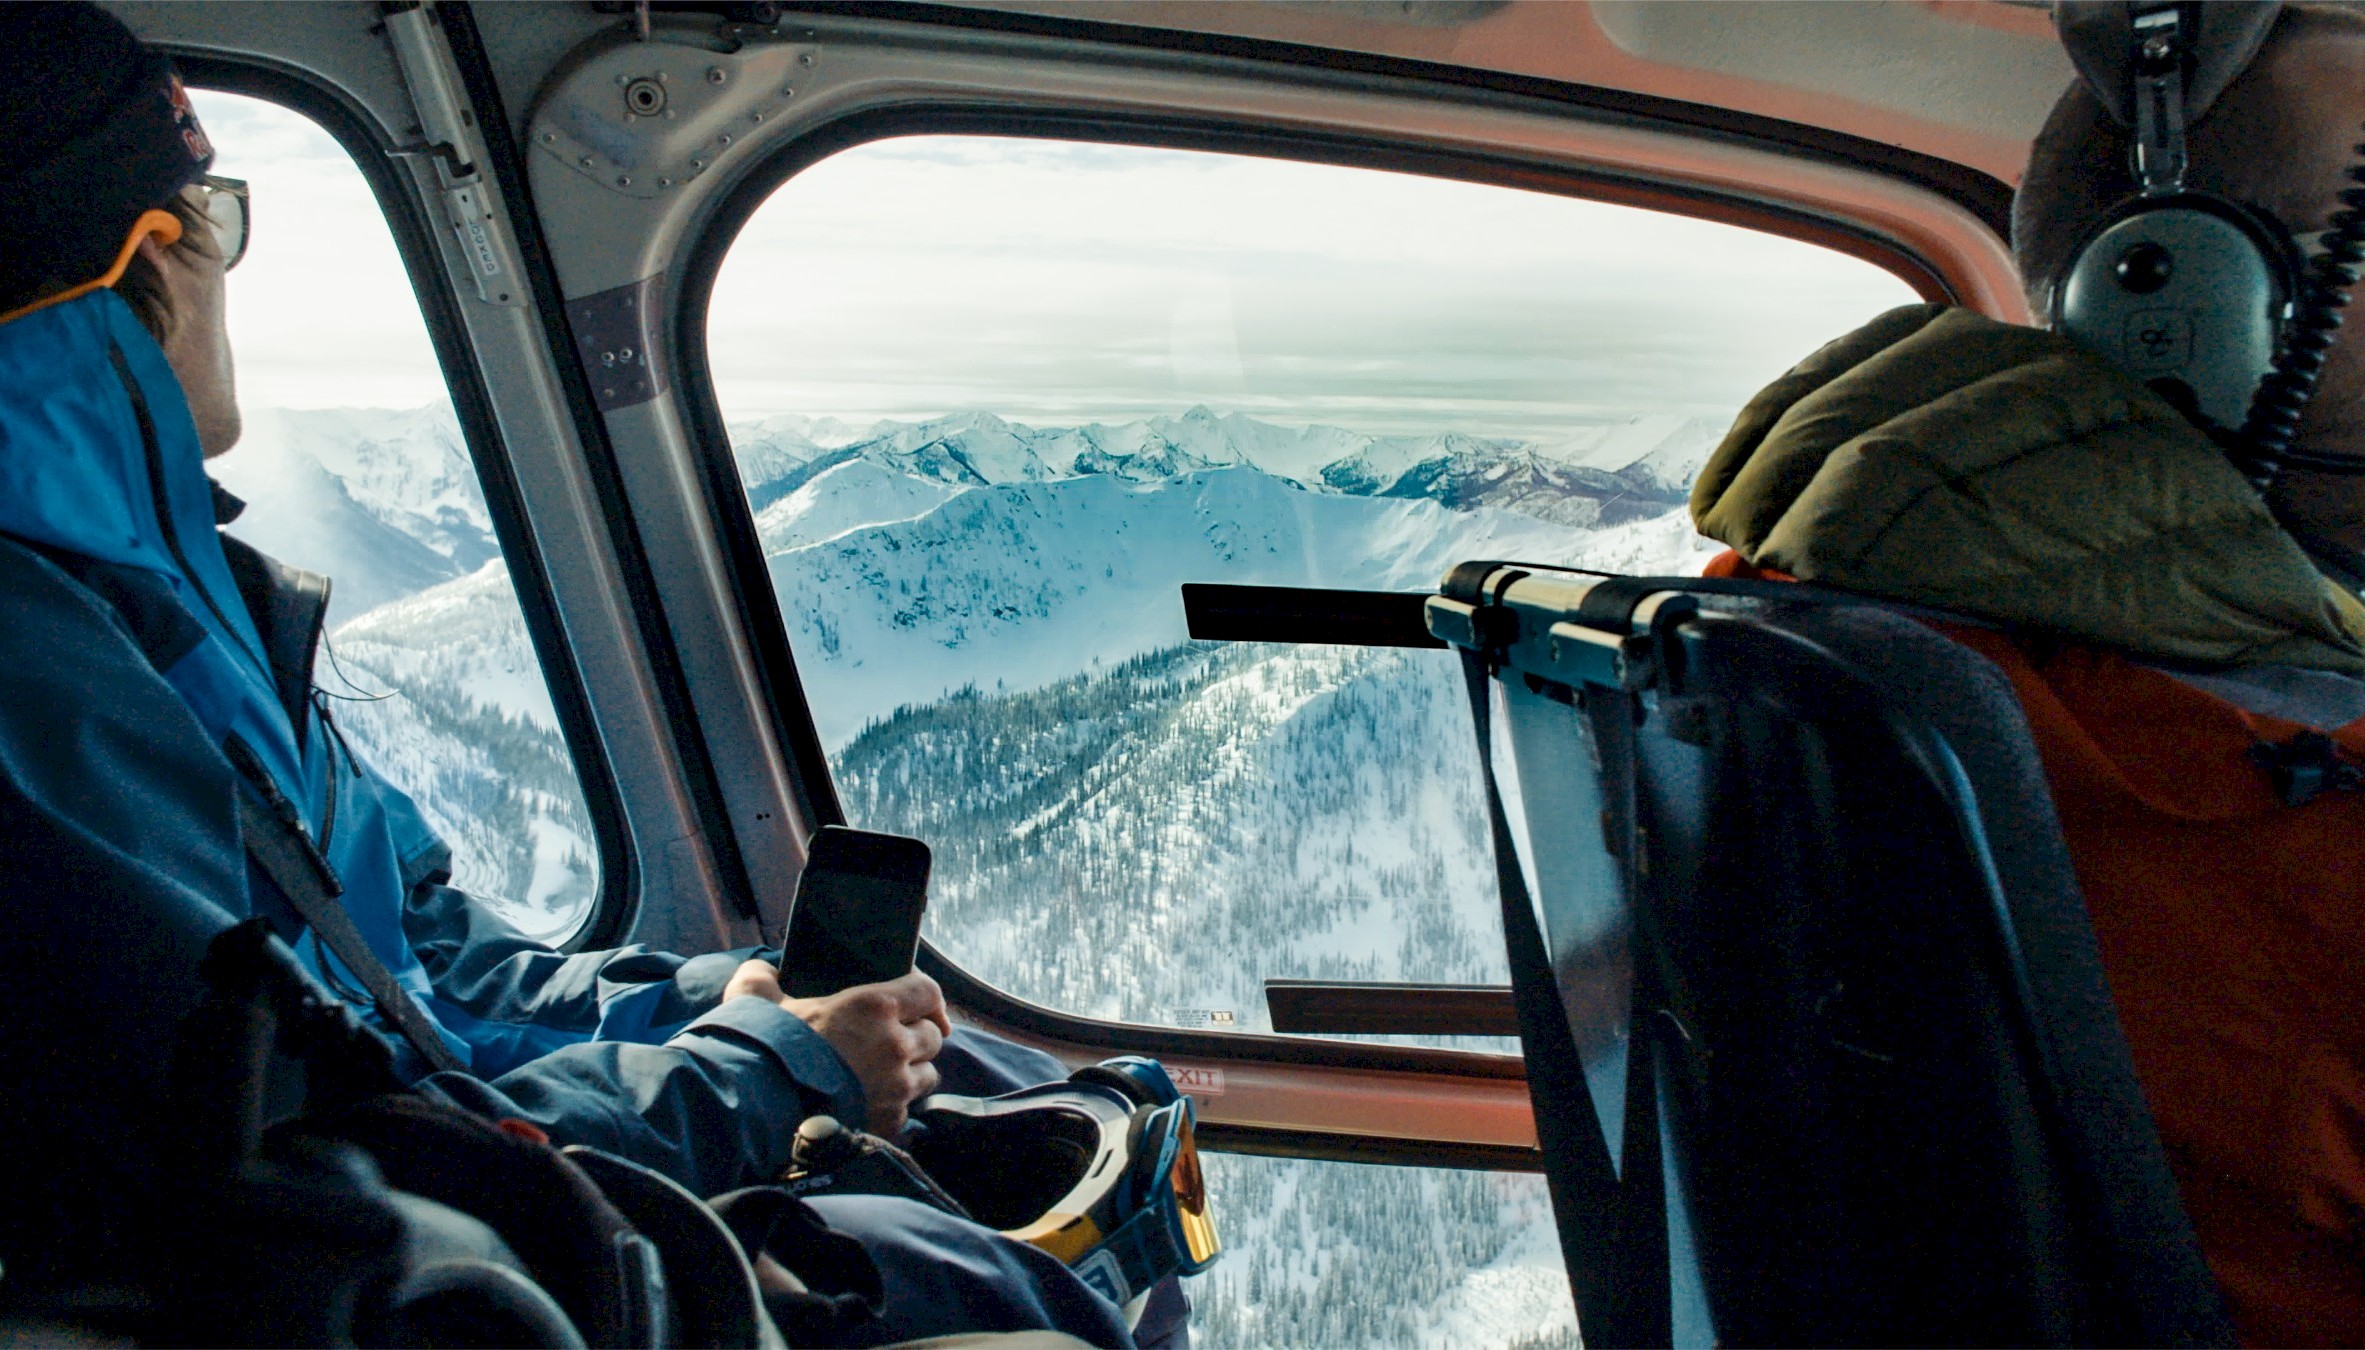 View from the Stellar Heliskiing helicopter.